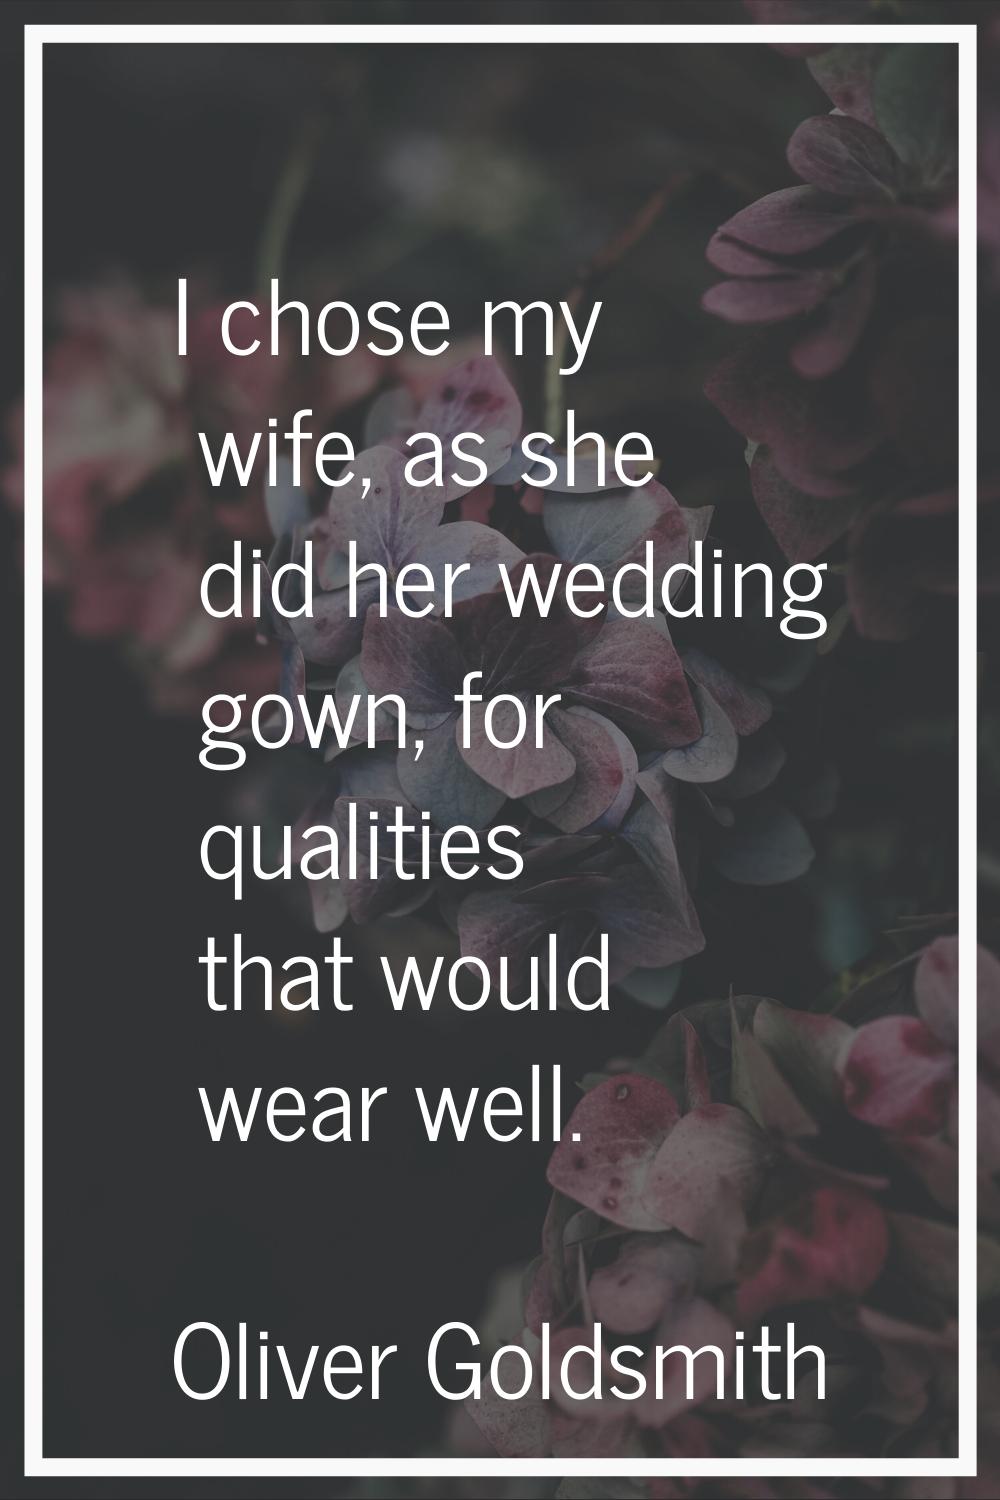 I chose my wife, as she did her wedding gown, for qualities that would wear well.